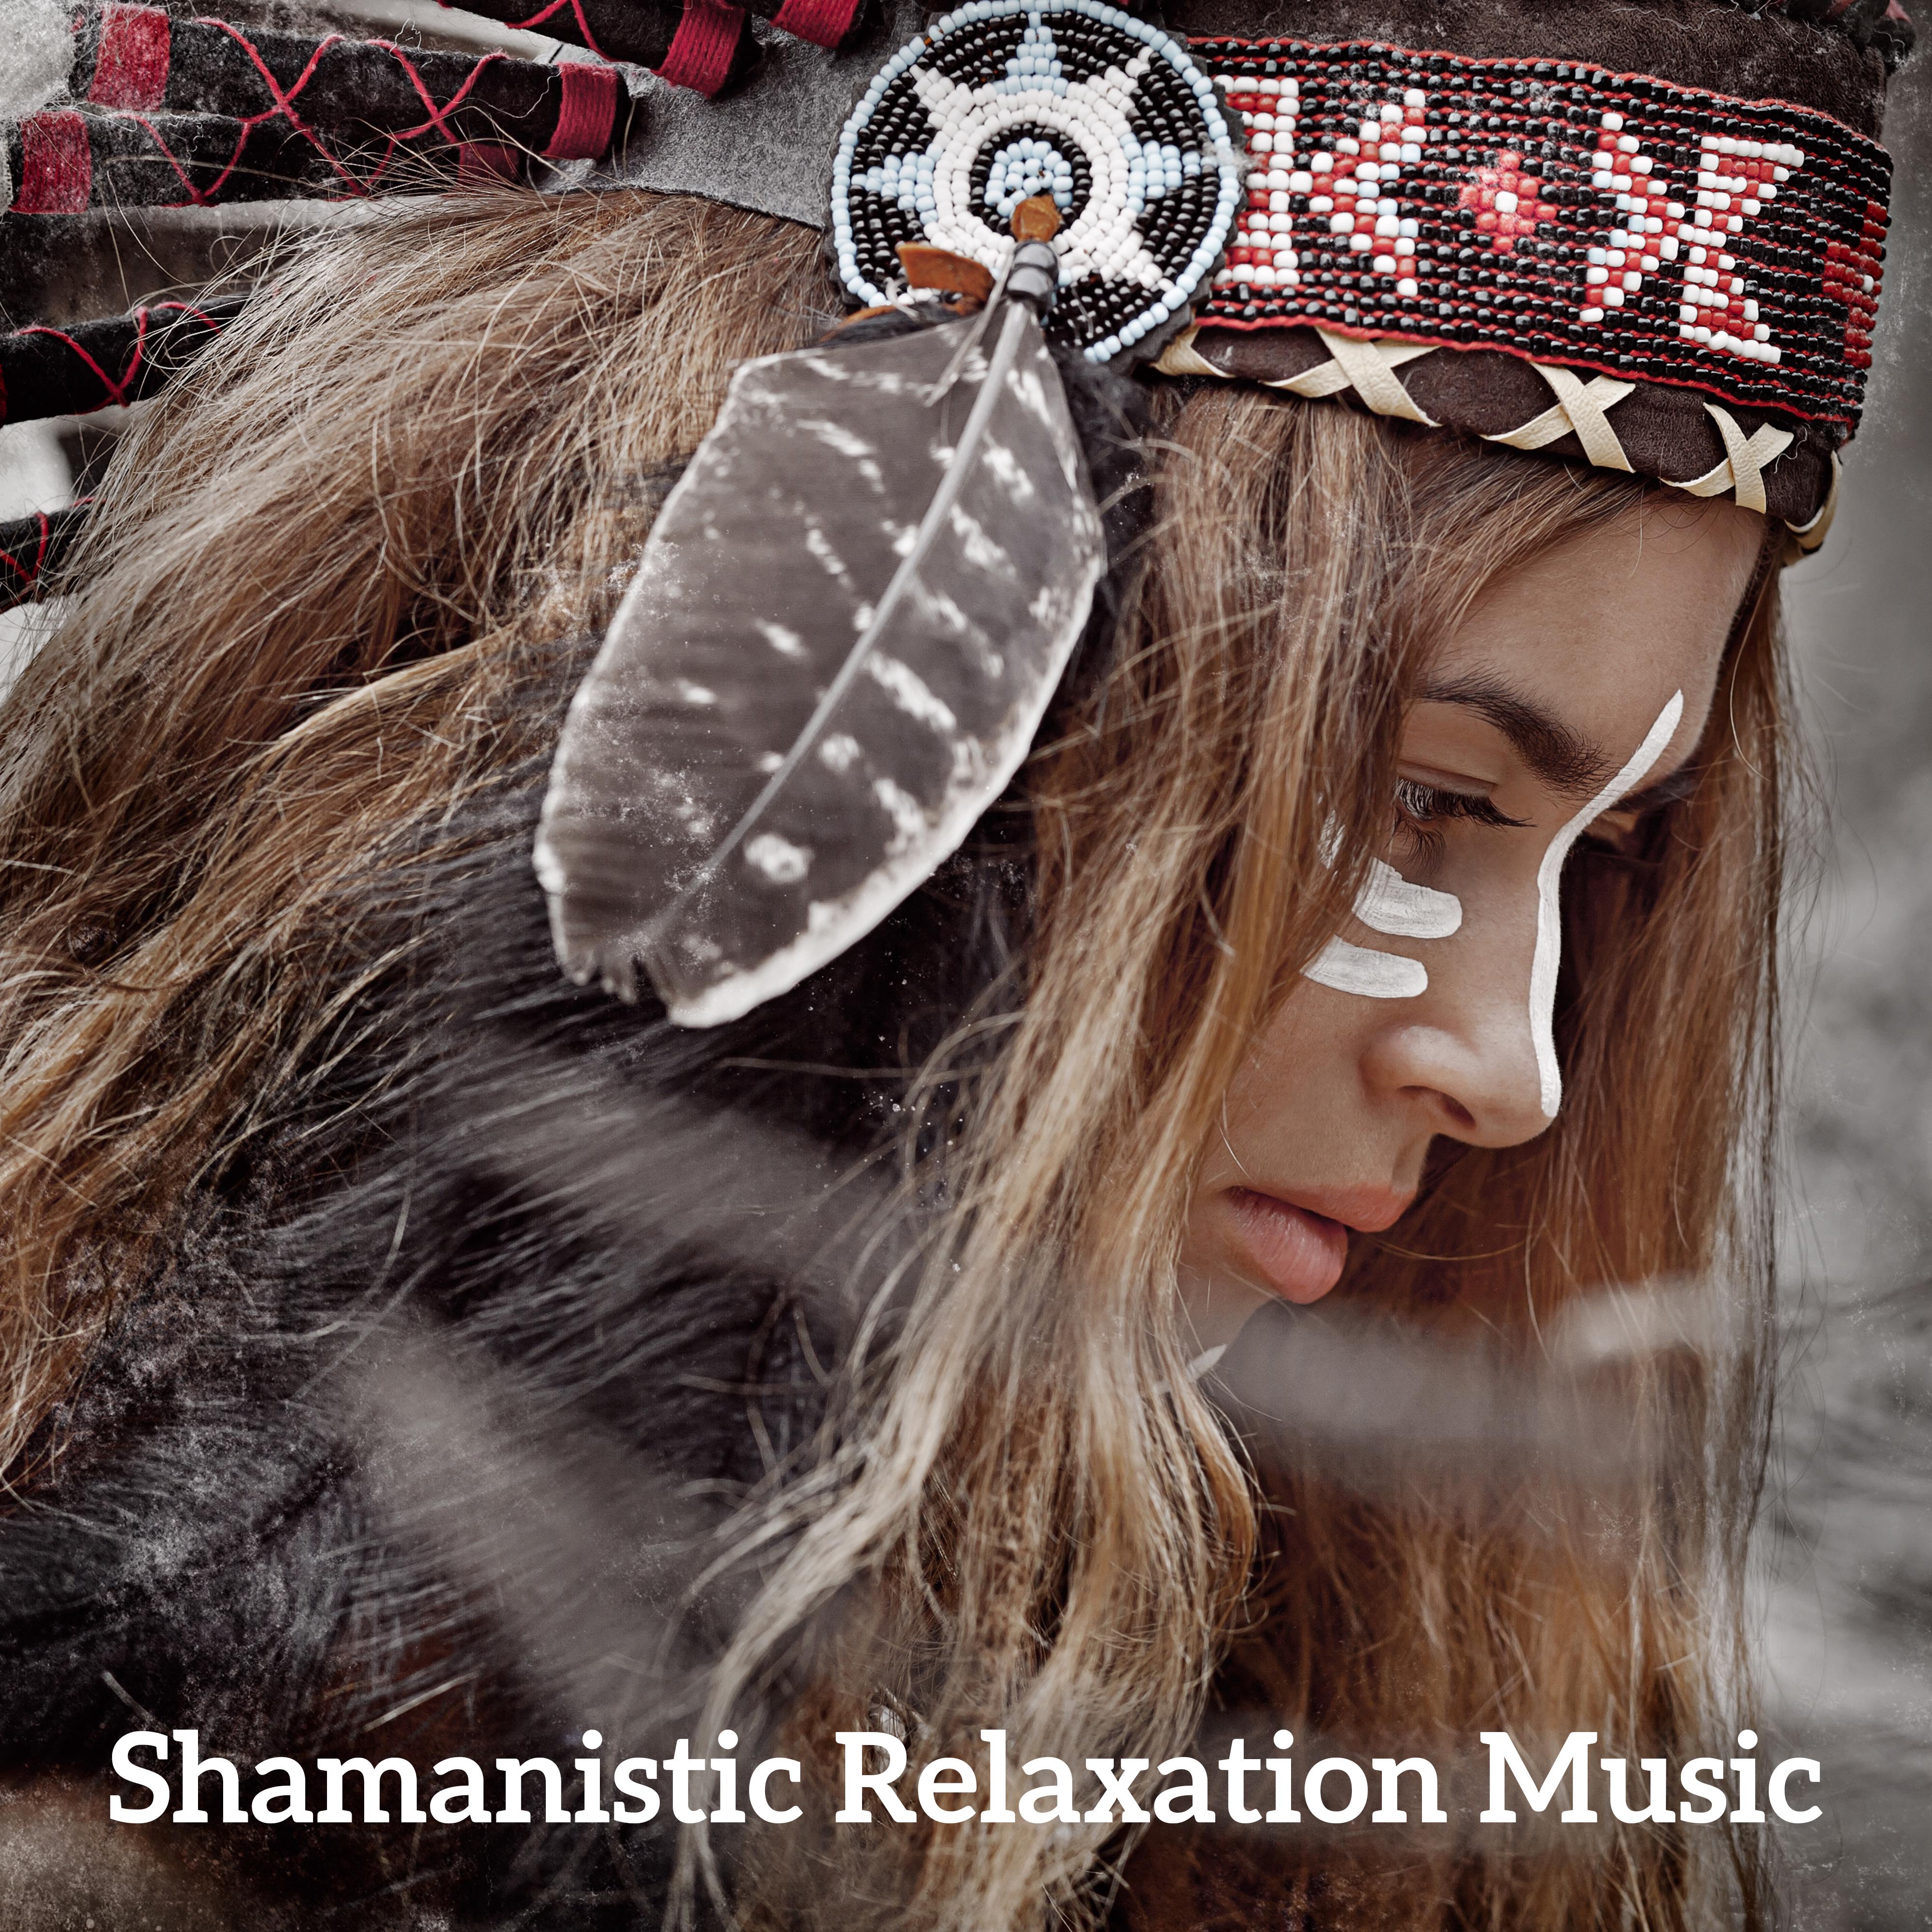 Shamanistic Relaxation Music: 15 Songs That’ll Help You Relax, Meditate, Calm Down, Rest and Chill Out